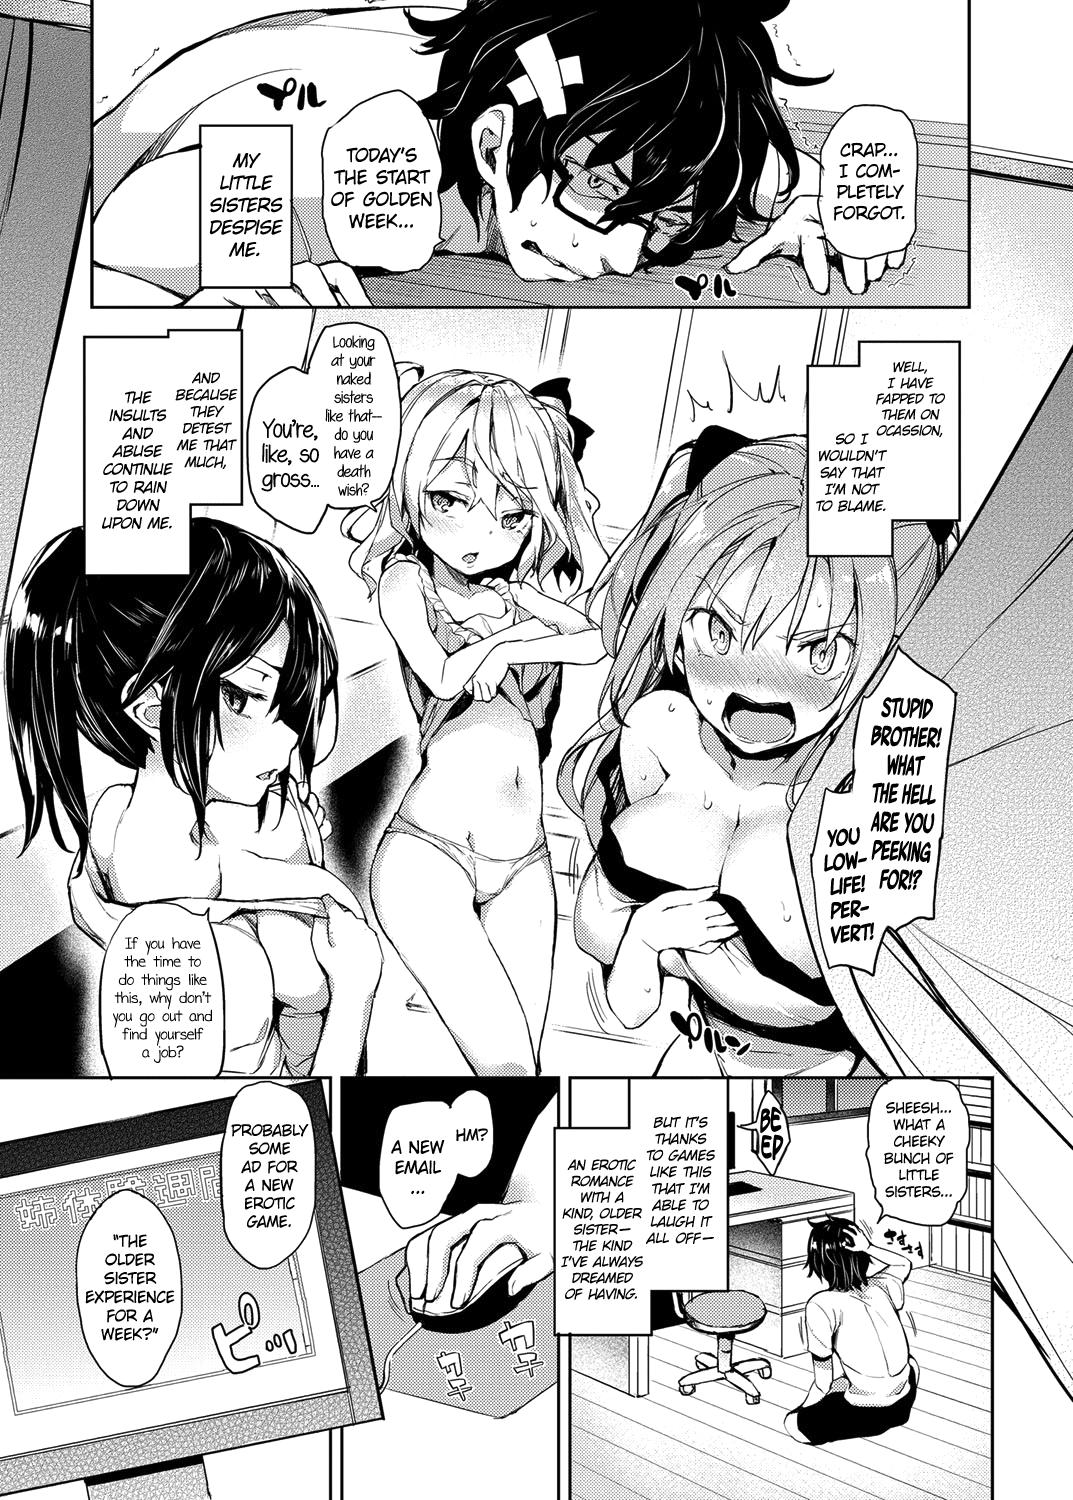 Ane Taiken Shuukan | The Older Sister Experience for a Week Ch. 1-2 3